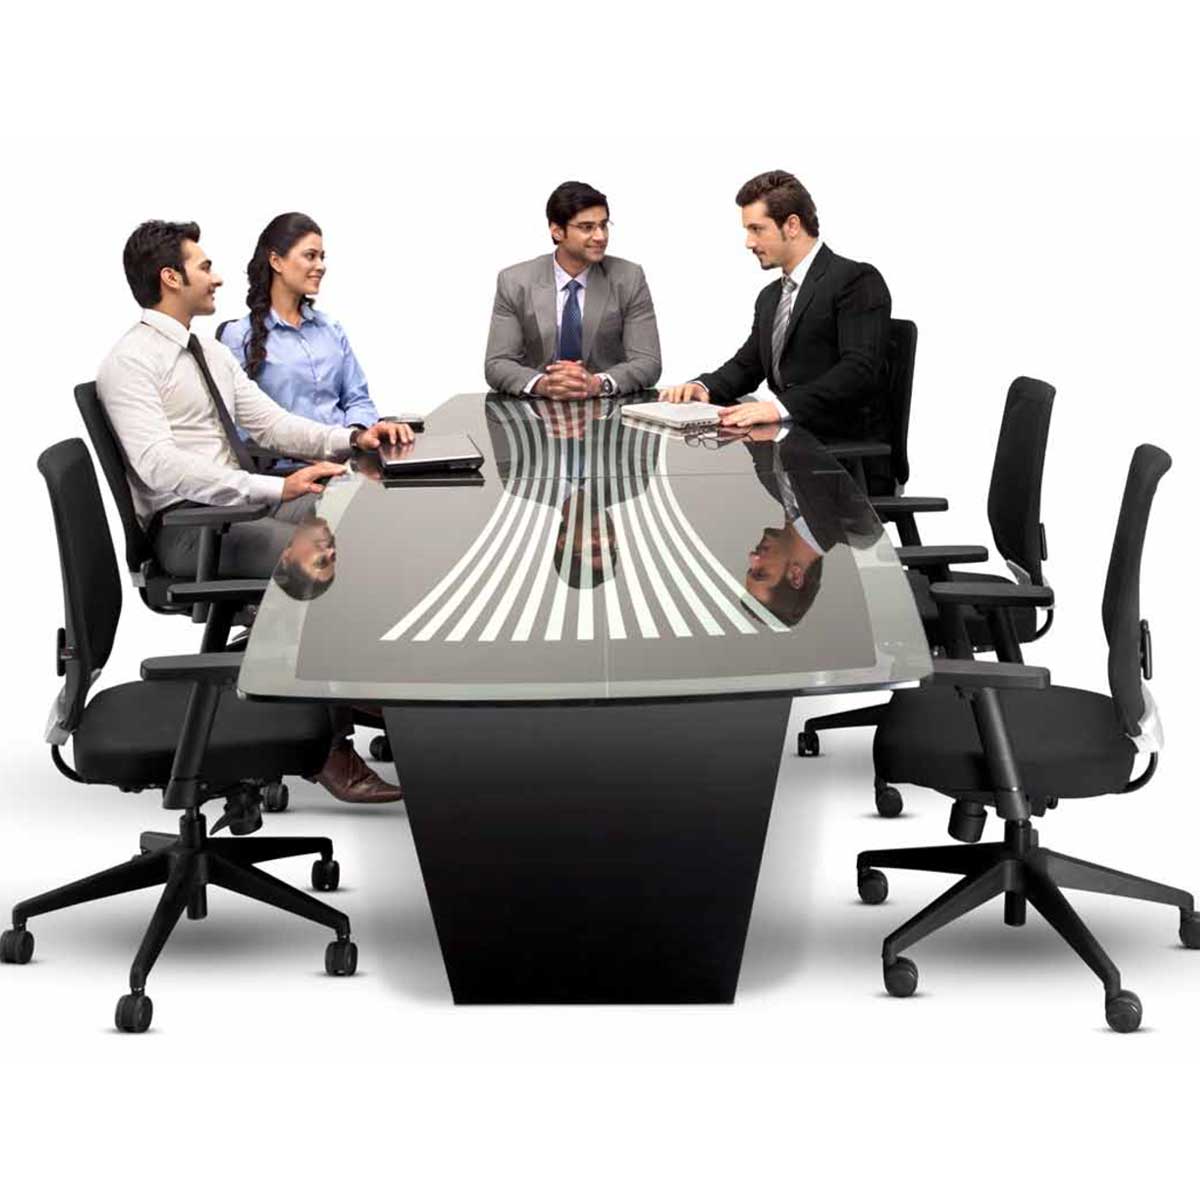 Conference table Manufacturers, Suppliers in Rohini Sector 5